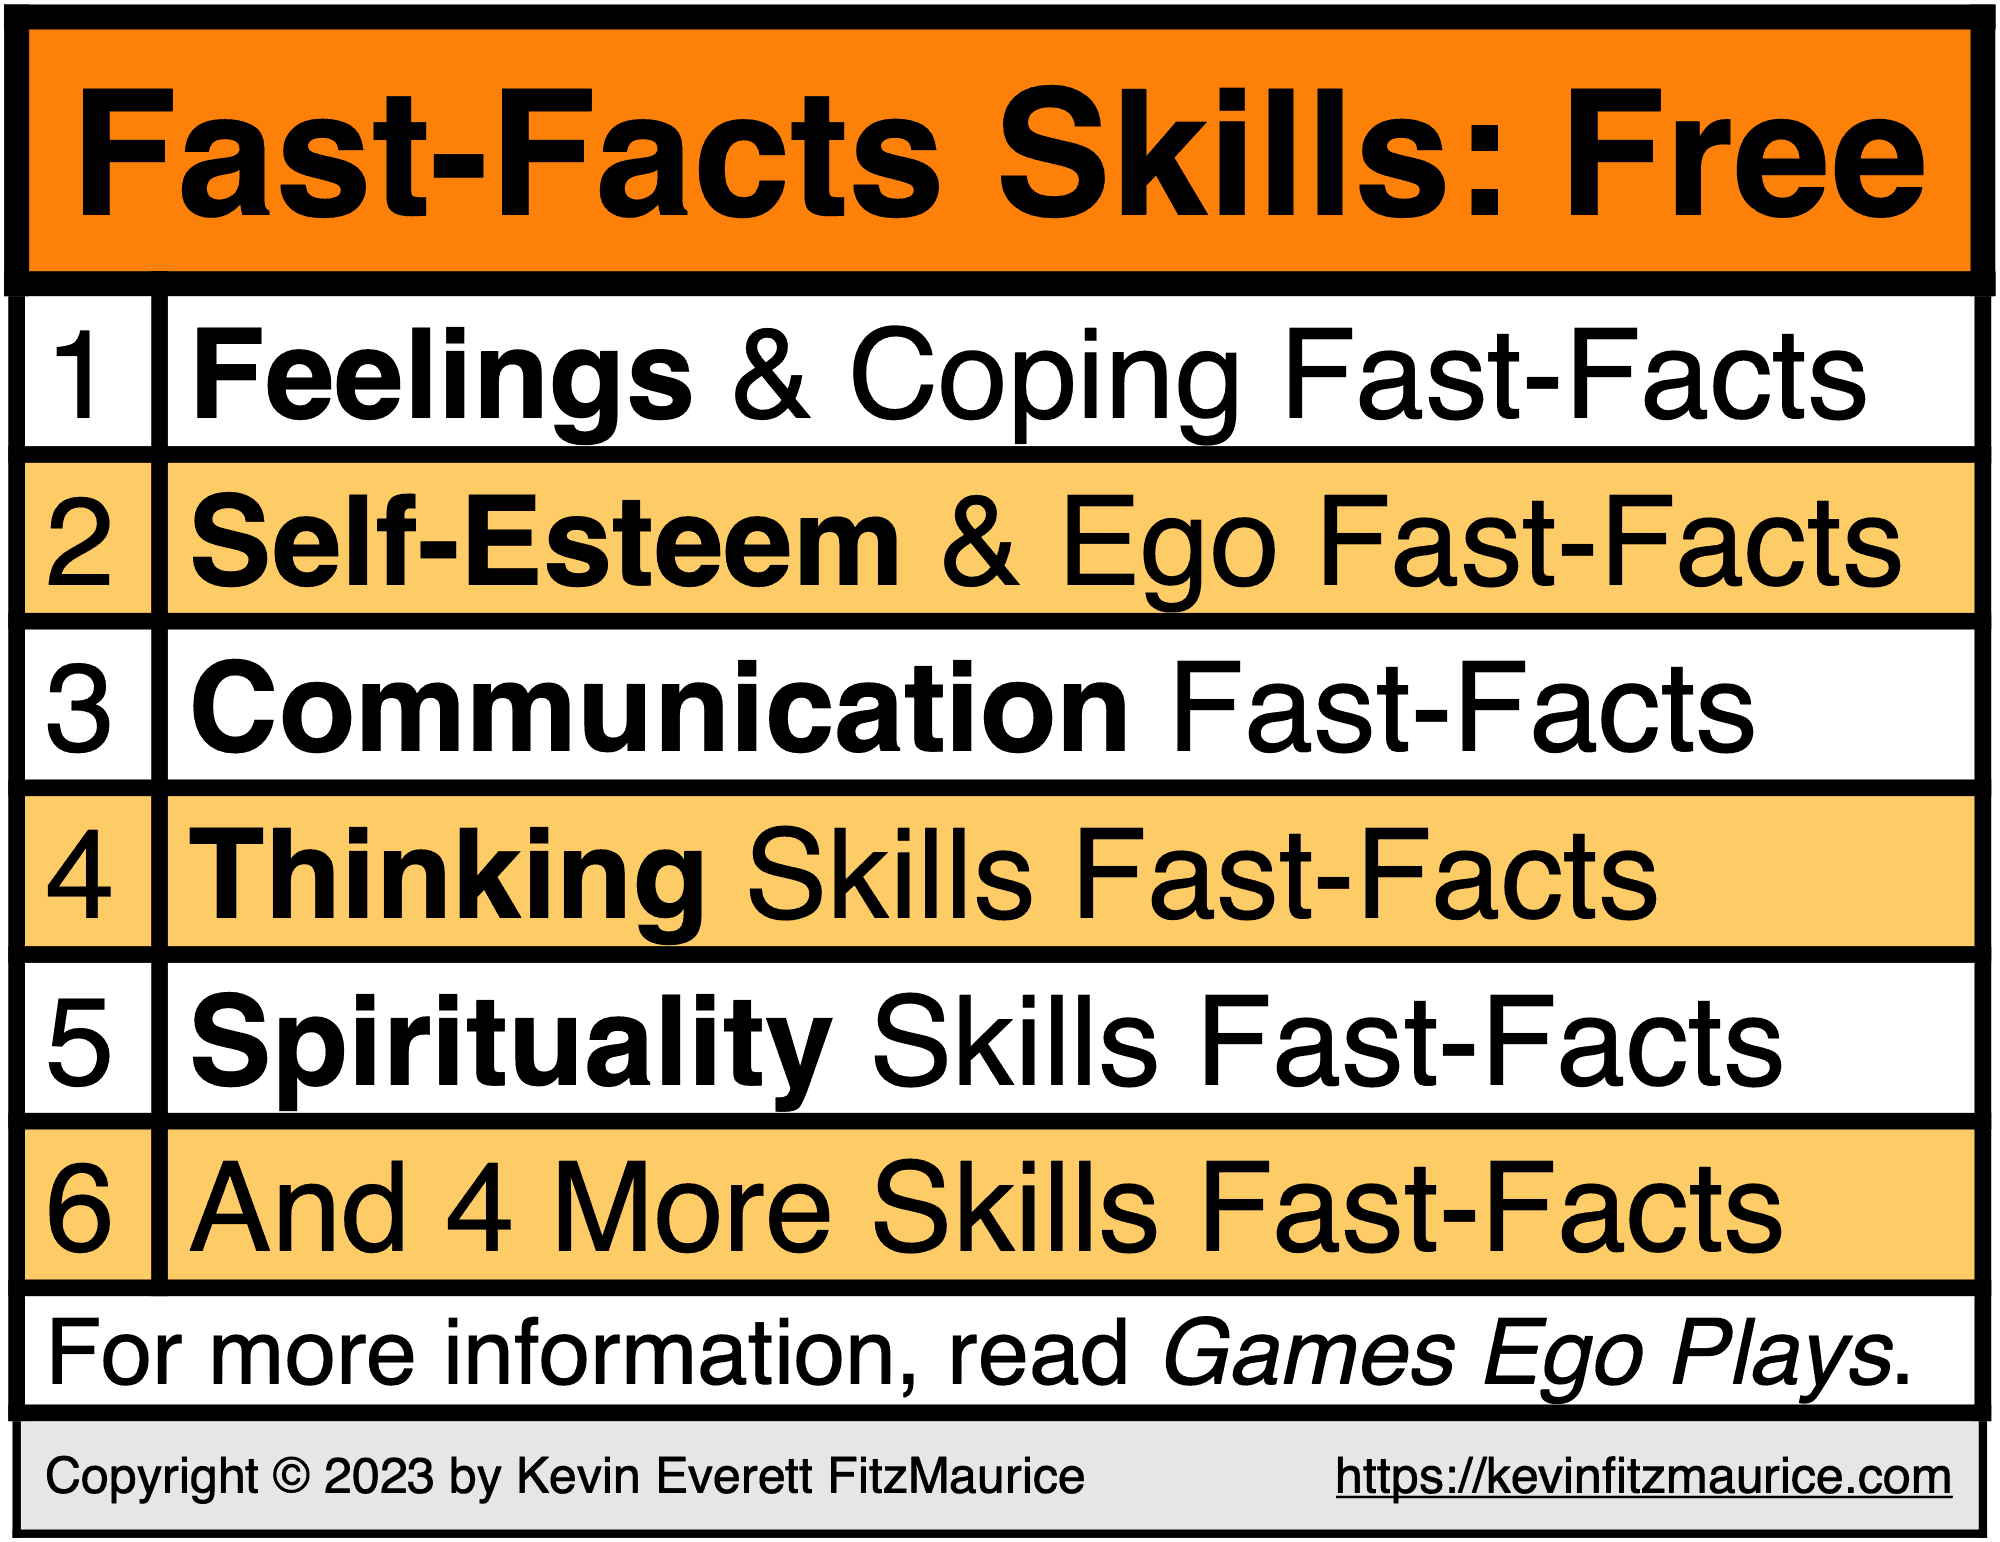 Free Fast-Facts are fast information. This page provides easy access to all FitzMaurice’s Fast-Facts pages from 2011 until now. Enjoy! Fast-Facts Skills: Free